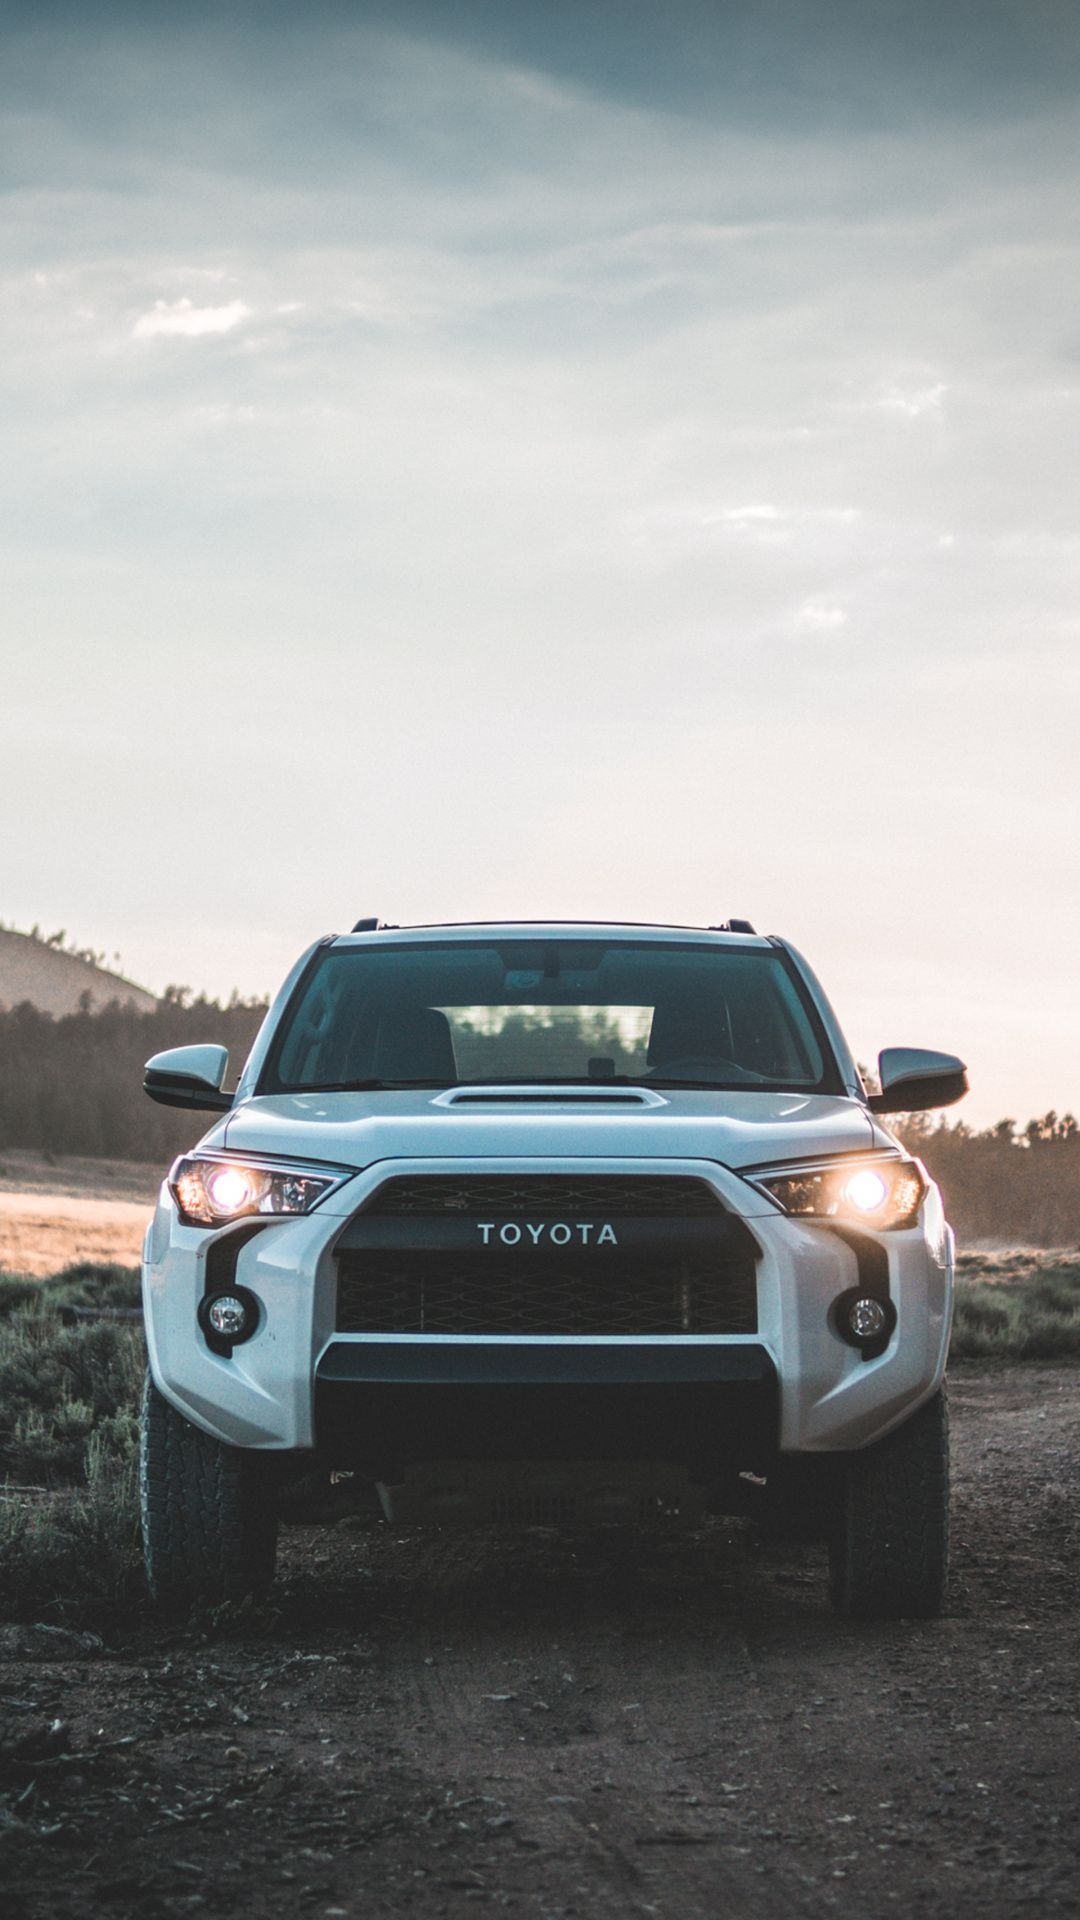 Toyota Tundra, Stunning iPhone wallpapers, Captivating images, Trd sport, 1080x1920 Full HD Phone